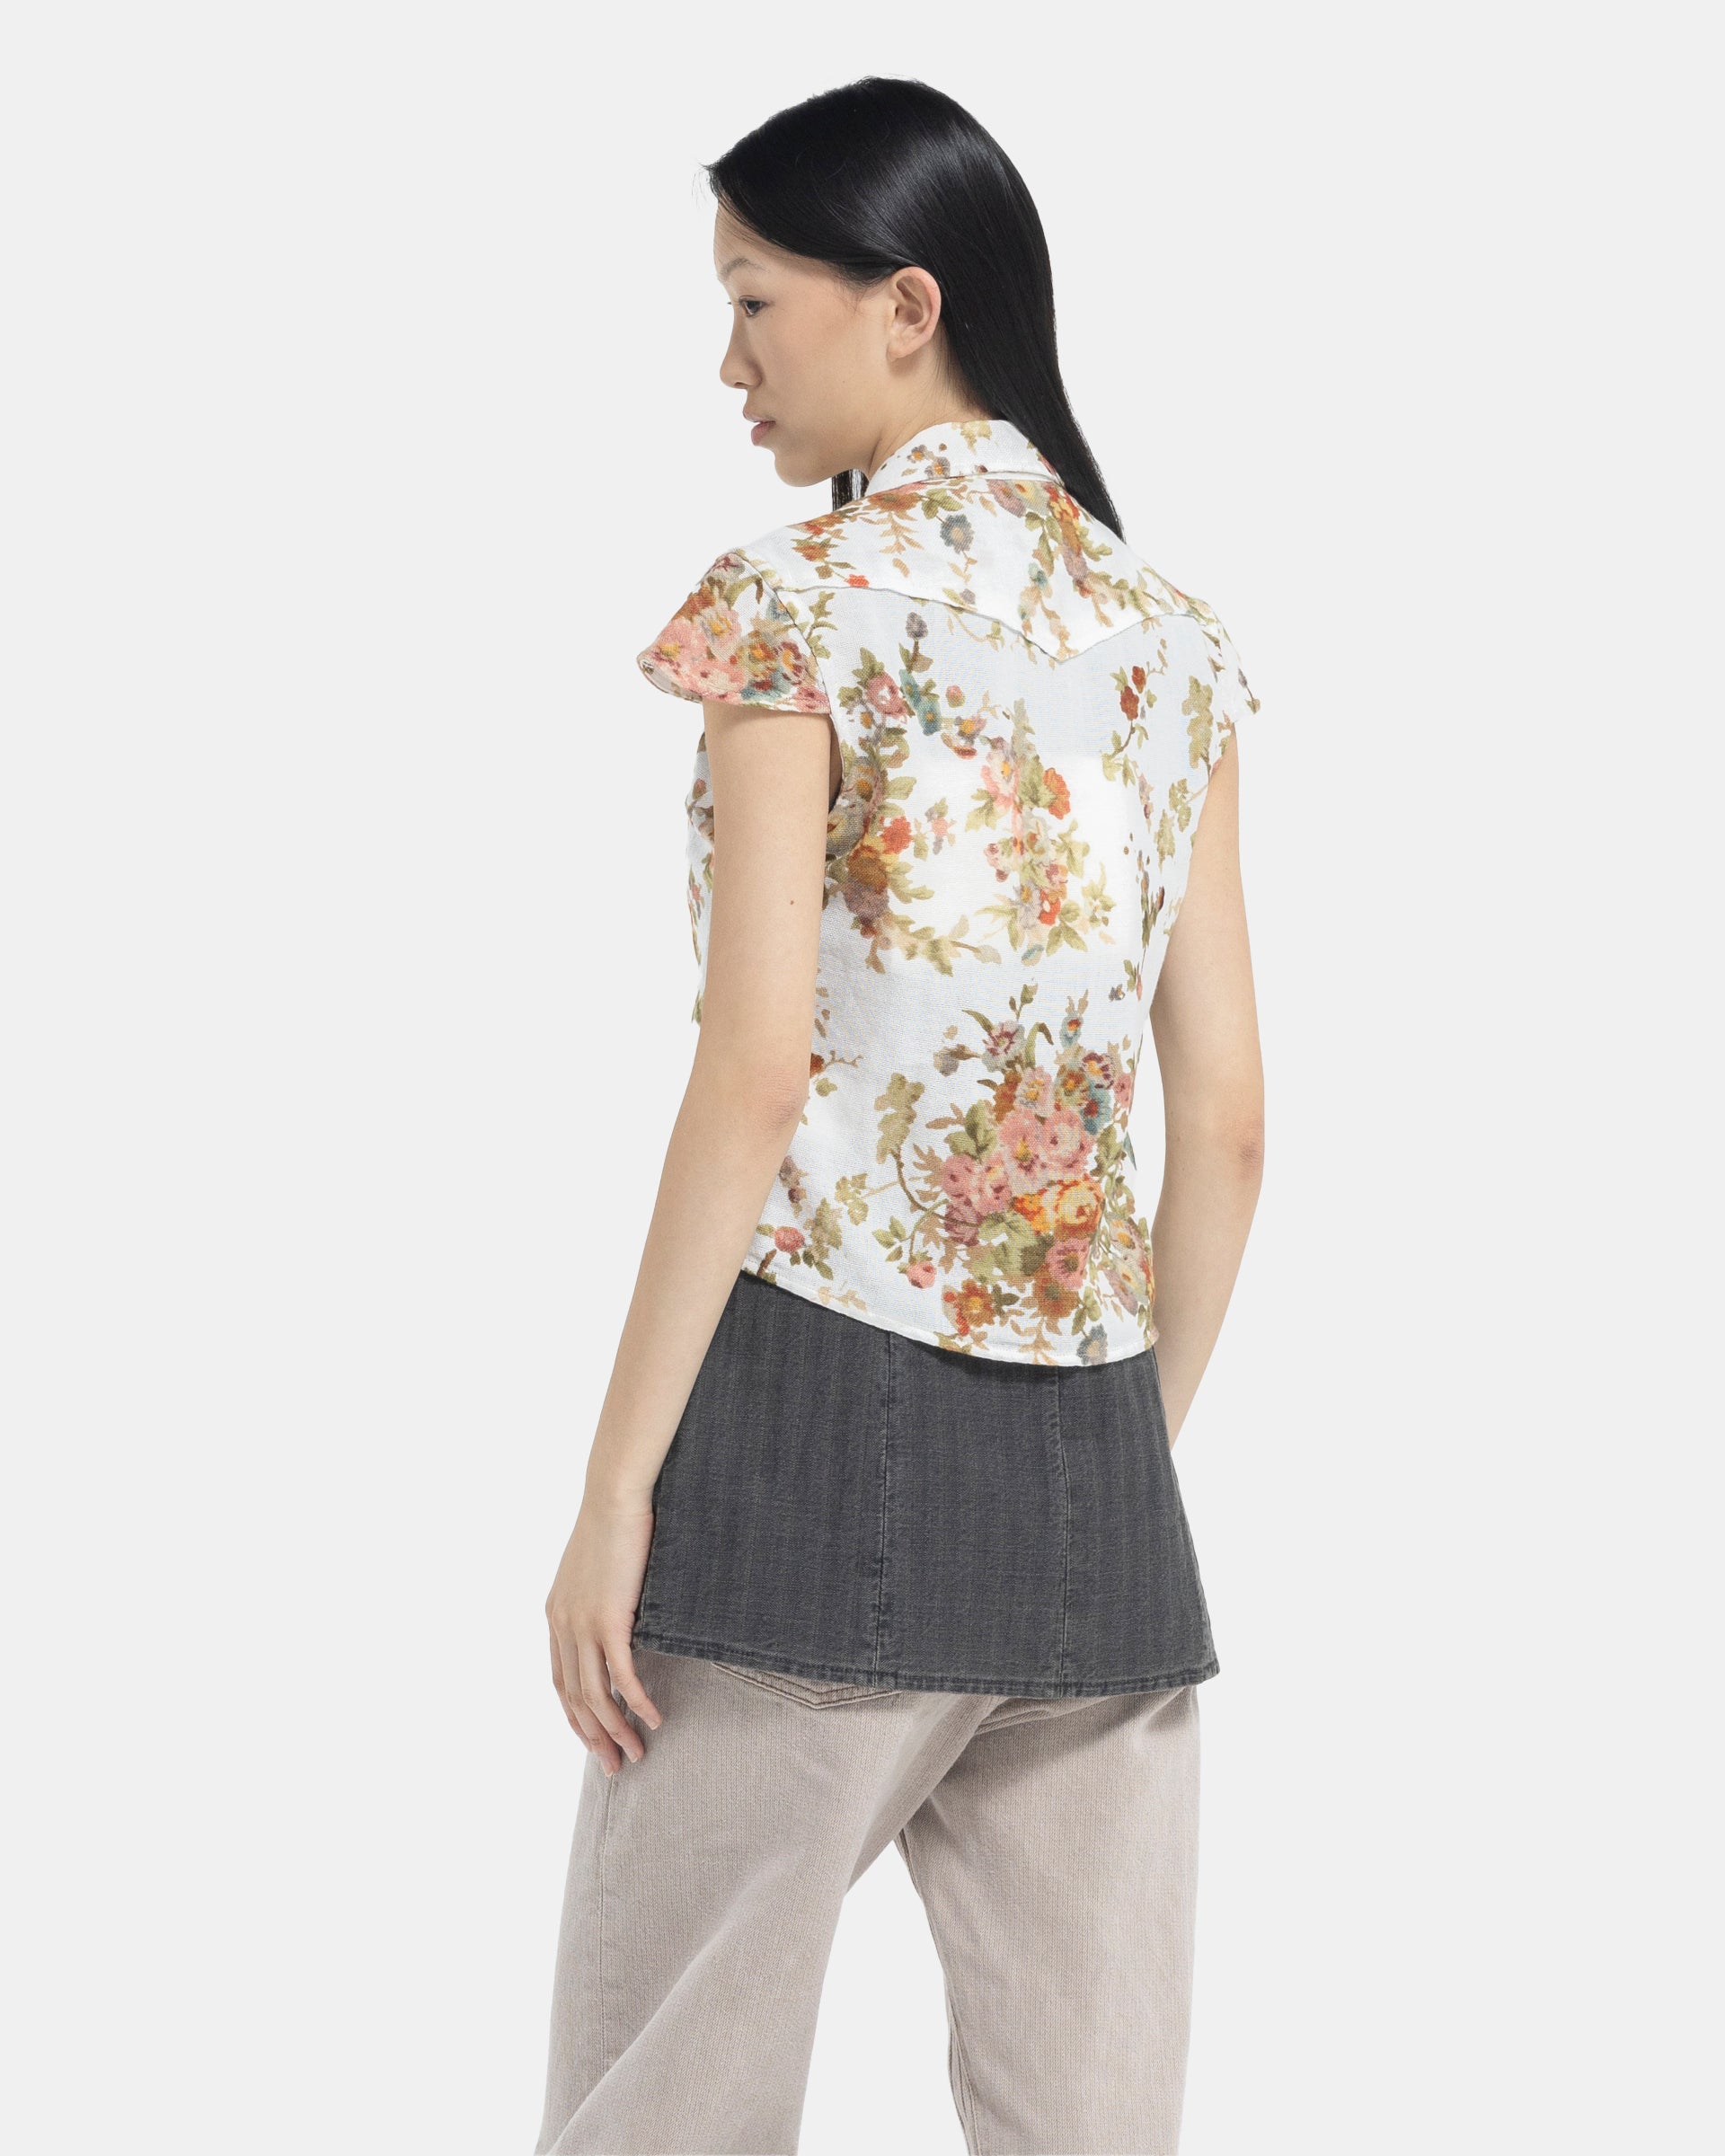 Daisy Shortsleeve Shirt in White Floral Tapestry